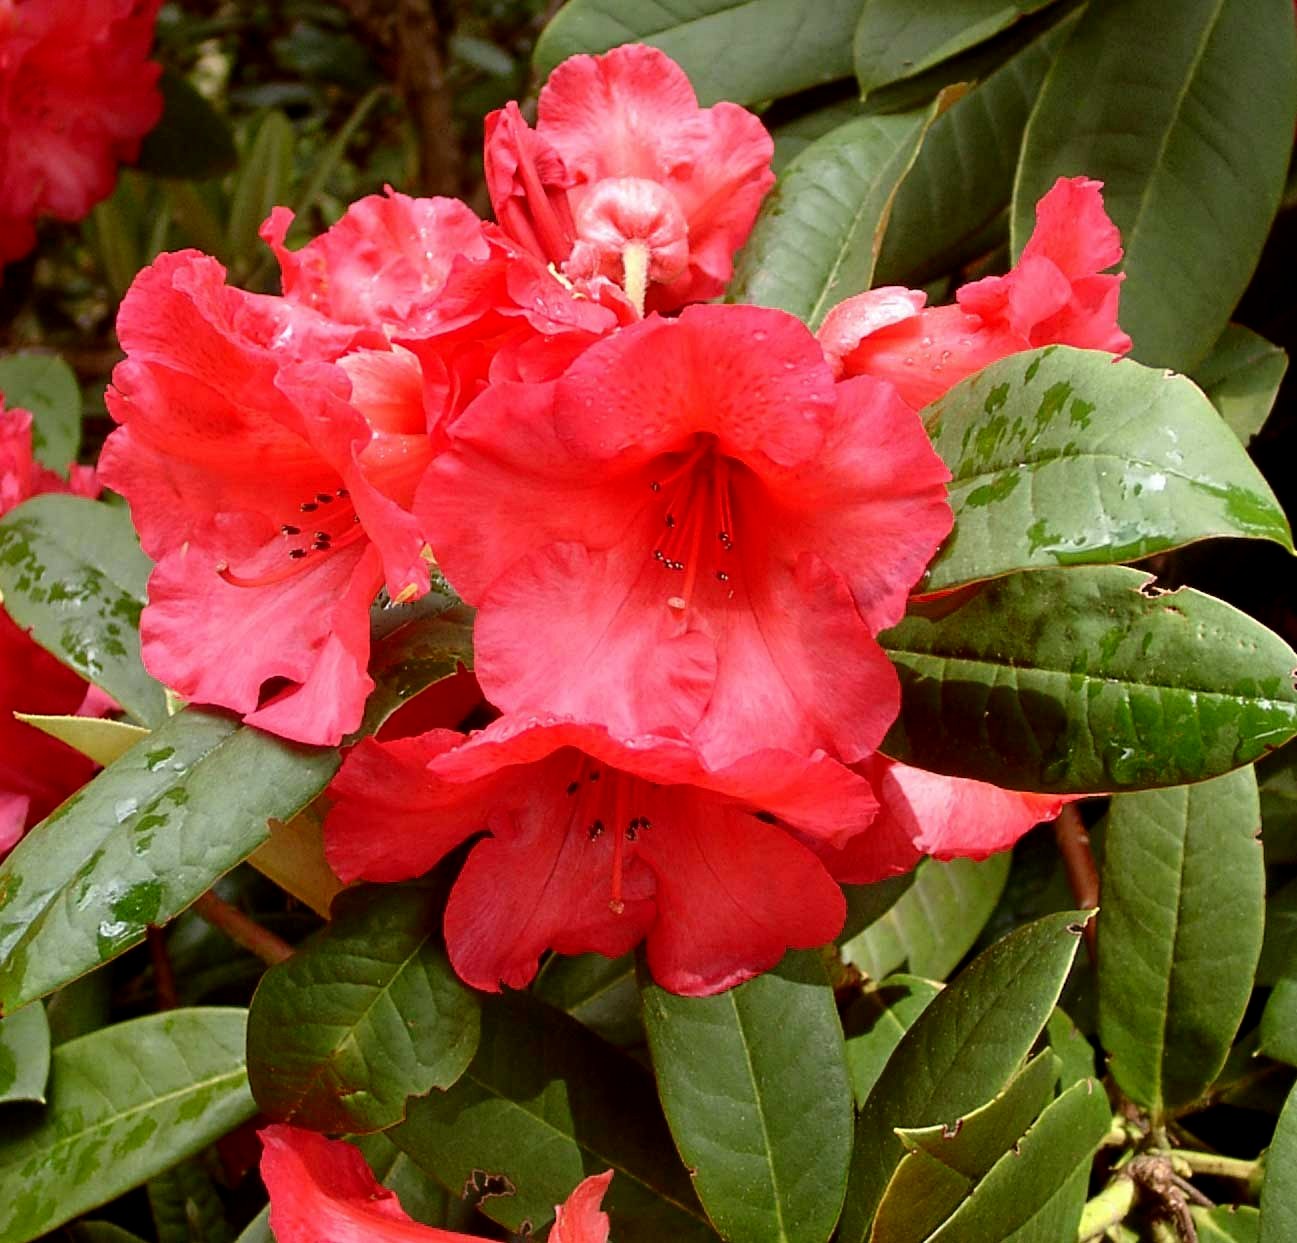 POTLATCH Rhododendron Rhododendron Larger Hybrids